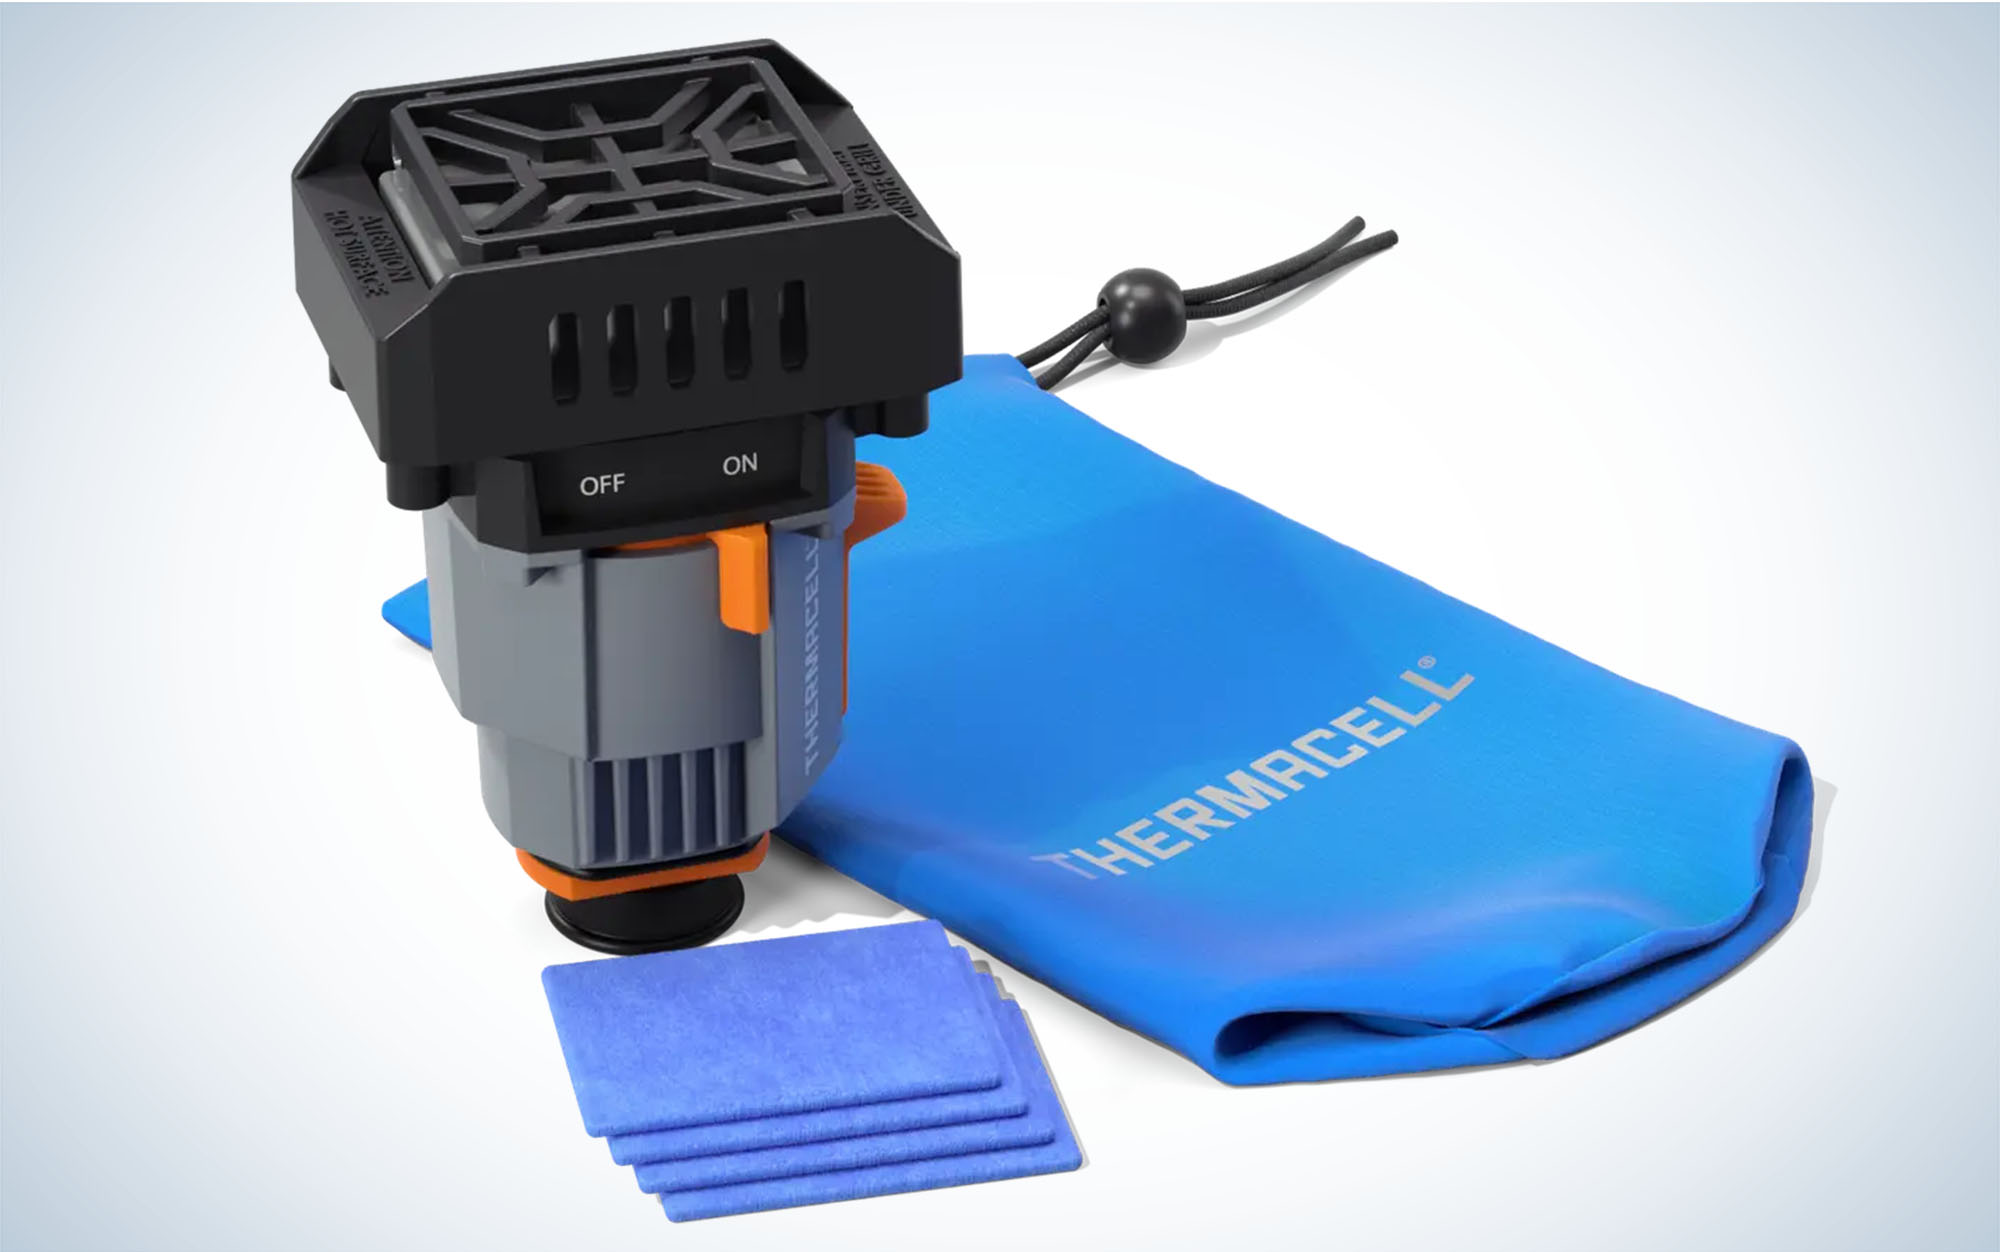 We tested the Thermacell backpacker.